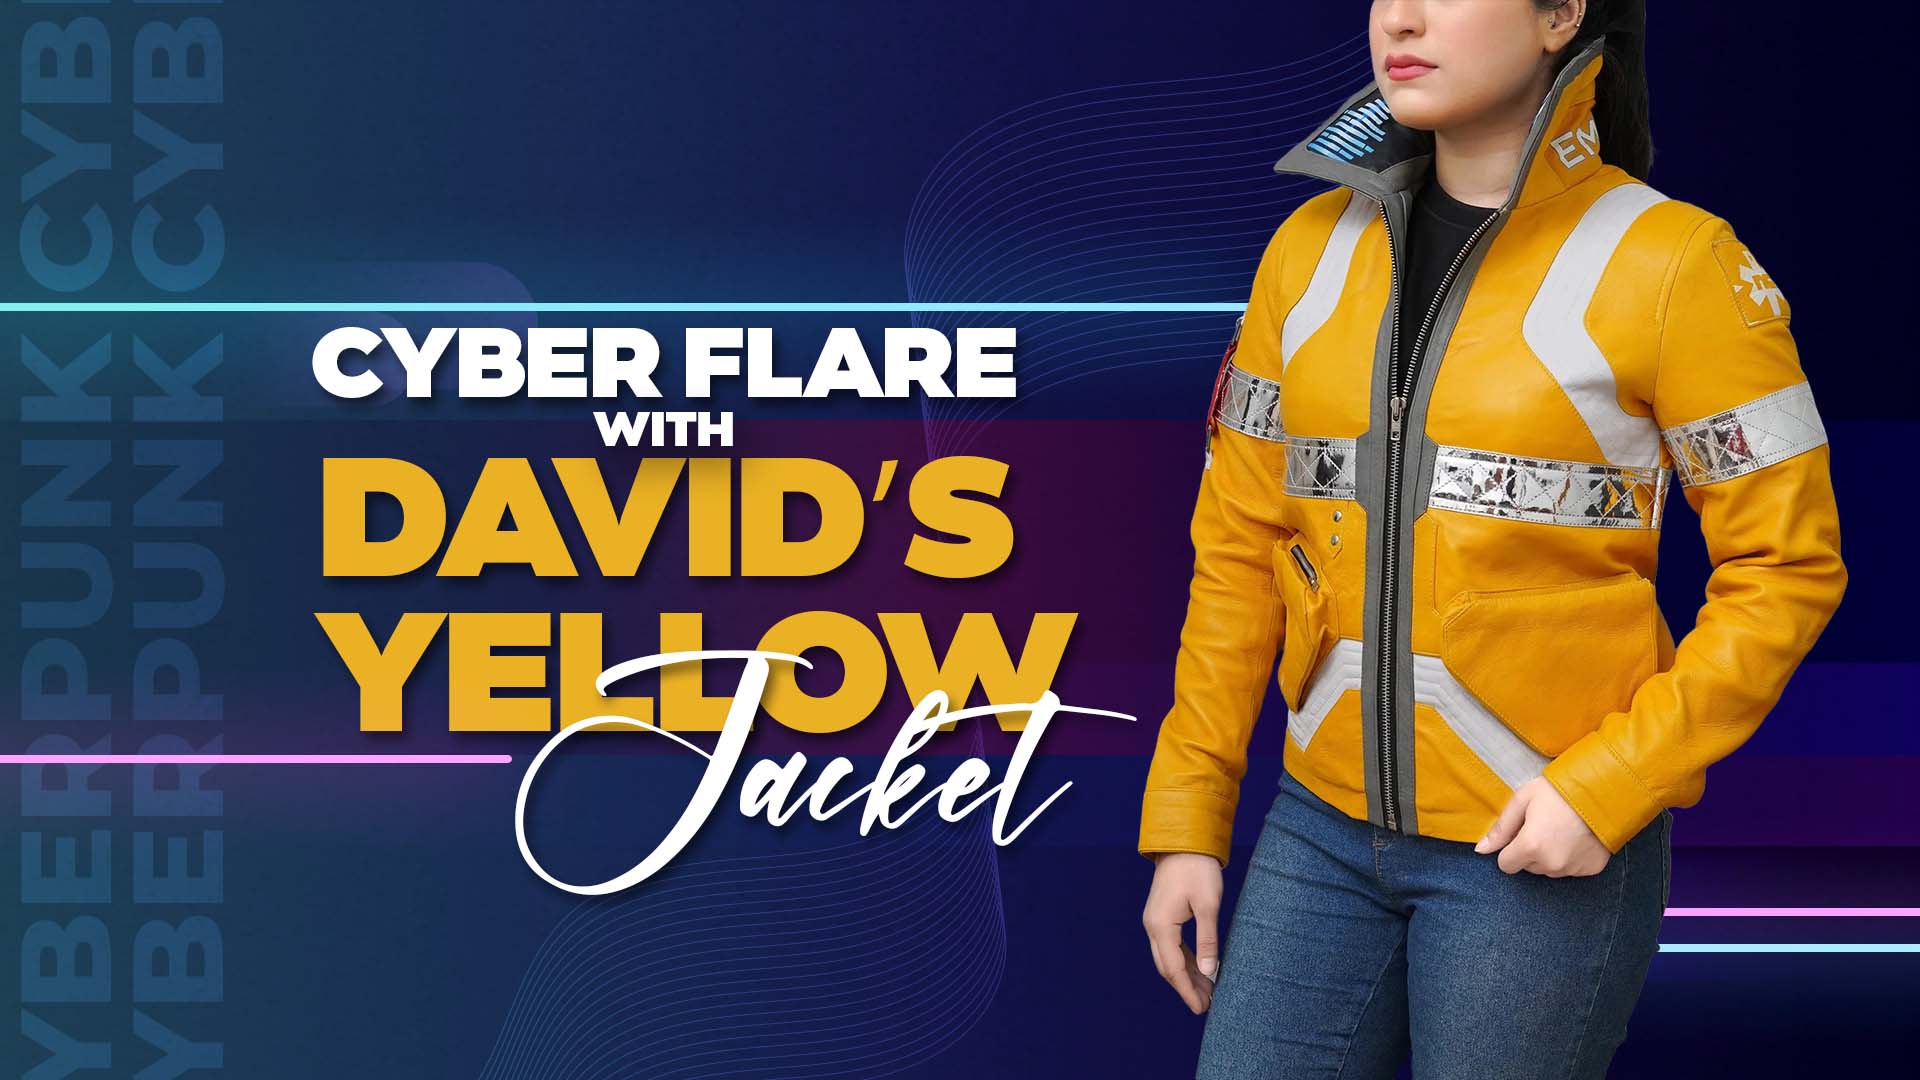 Cyber Flare with David’s Yellow Jacket